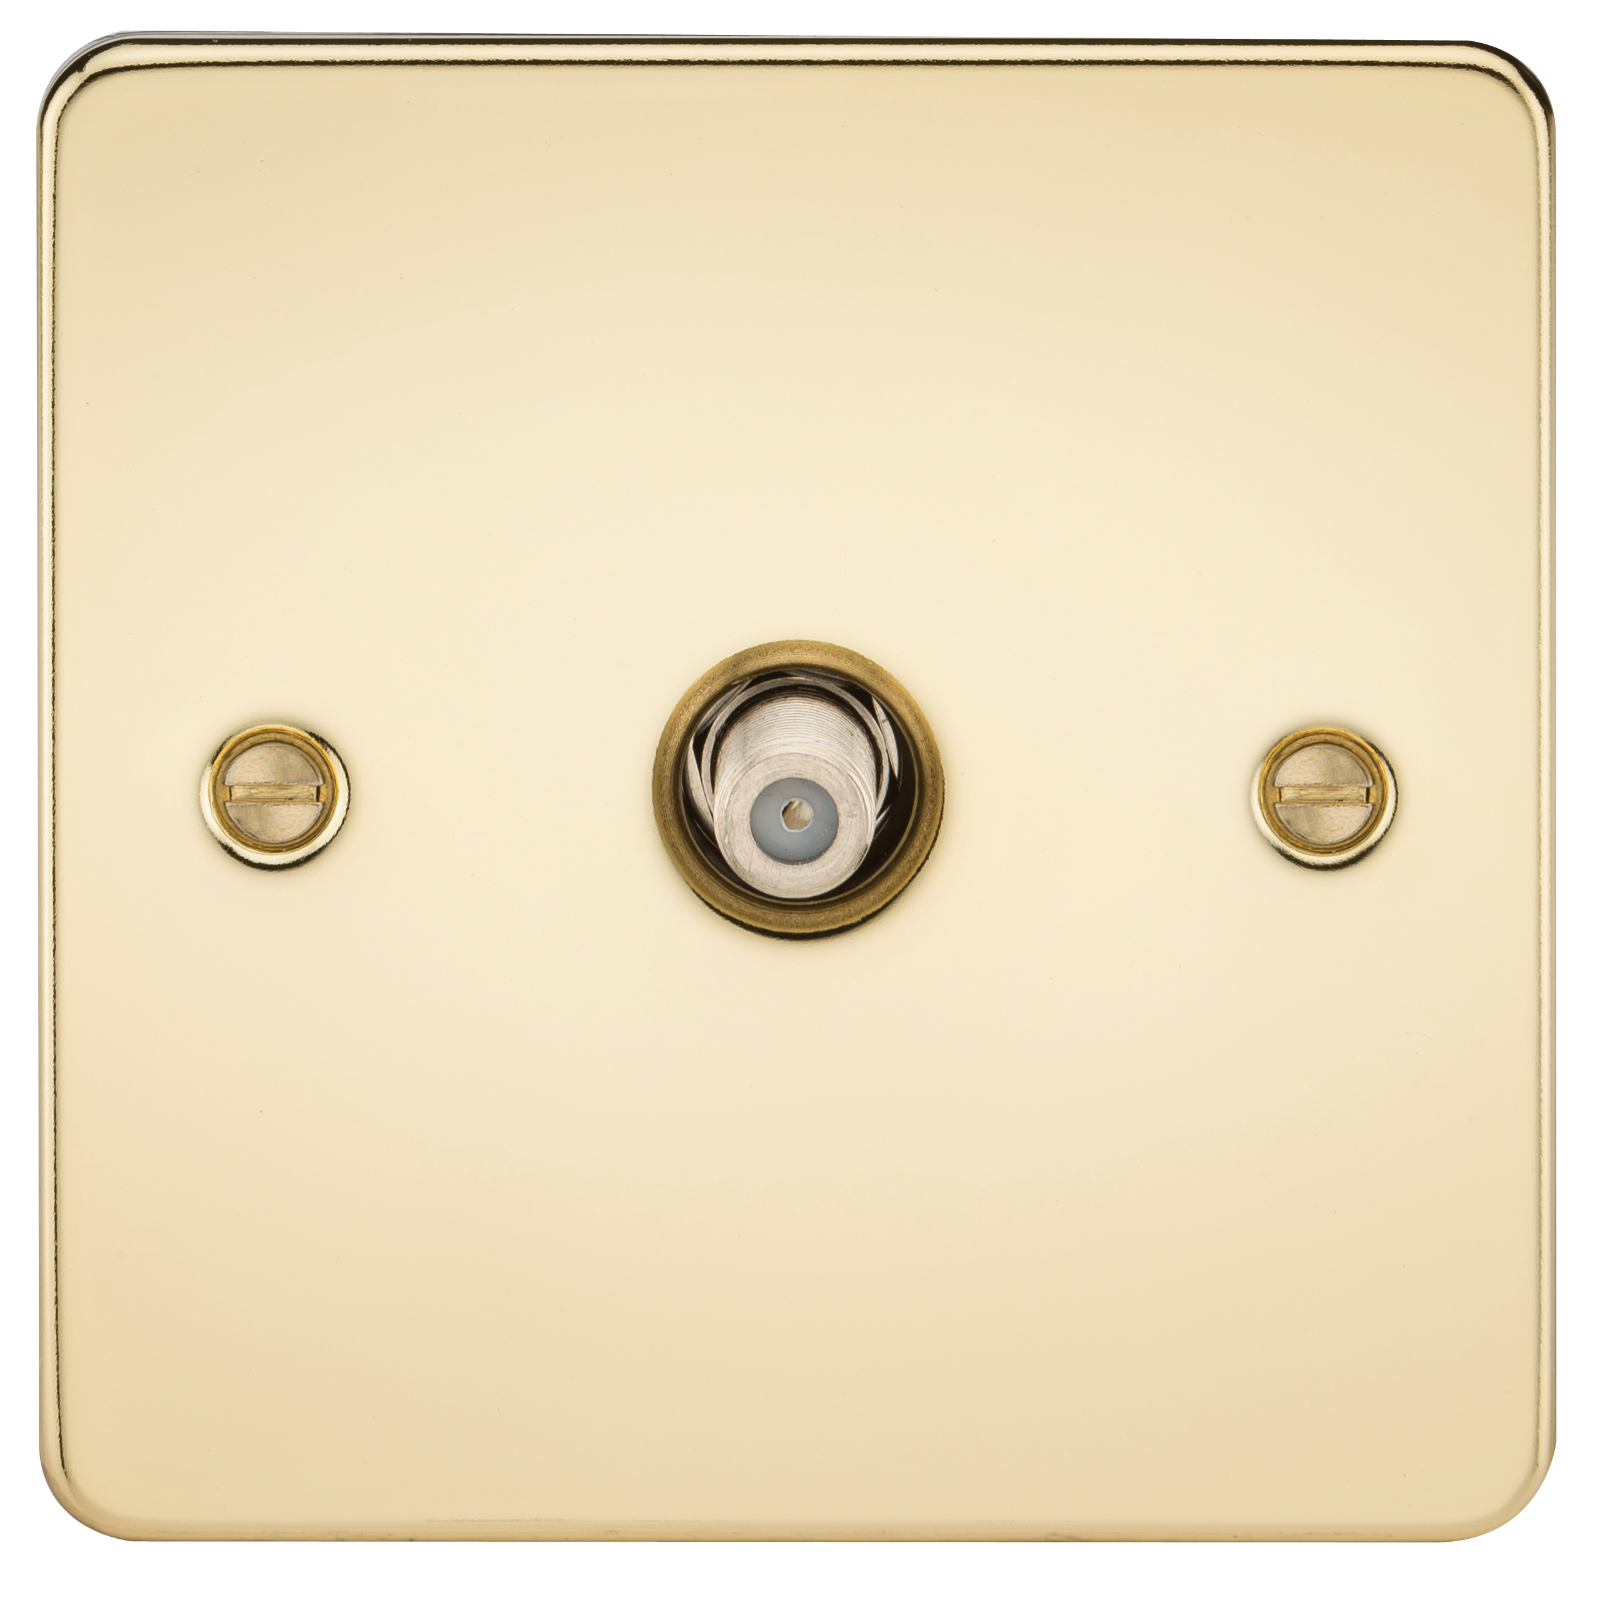 Flat Plate 1G SAT TV Outlet (non-isolated) - Polished Brass - FP0150PB 